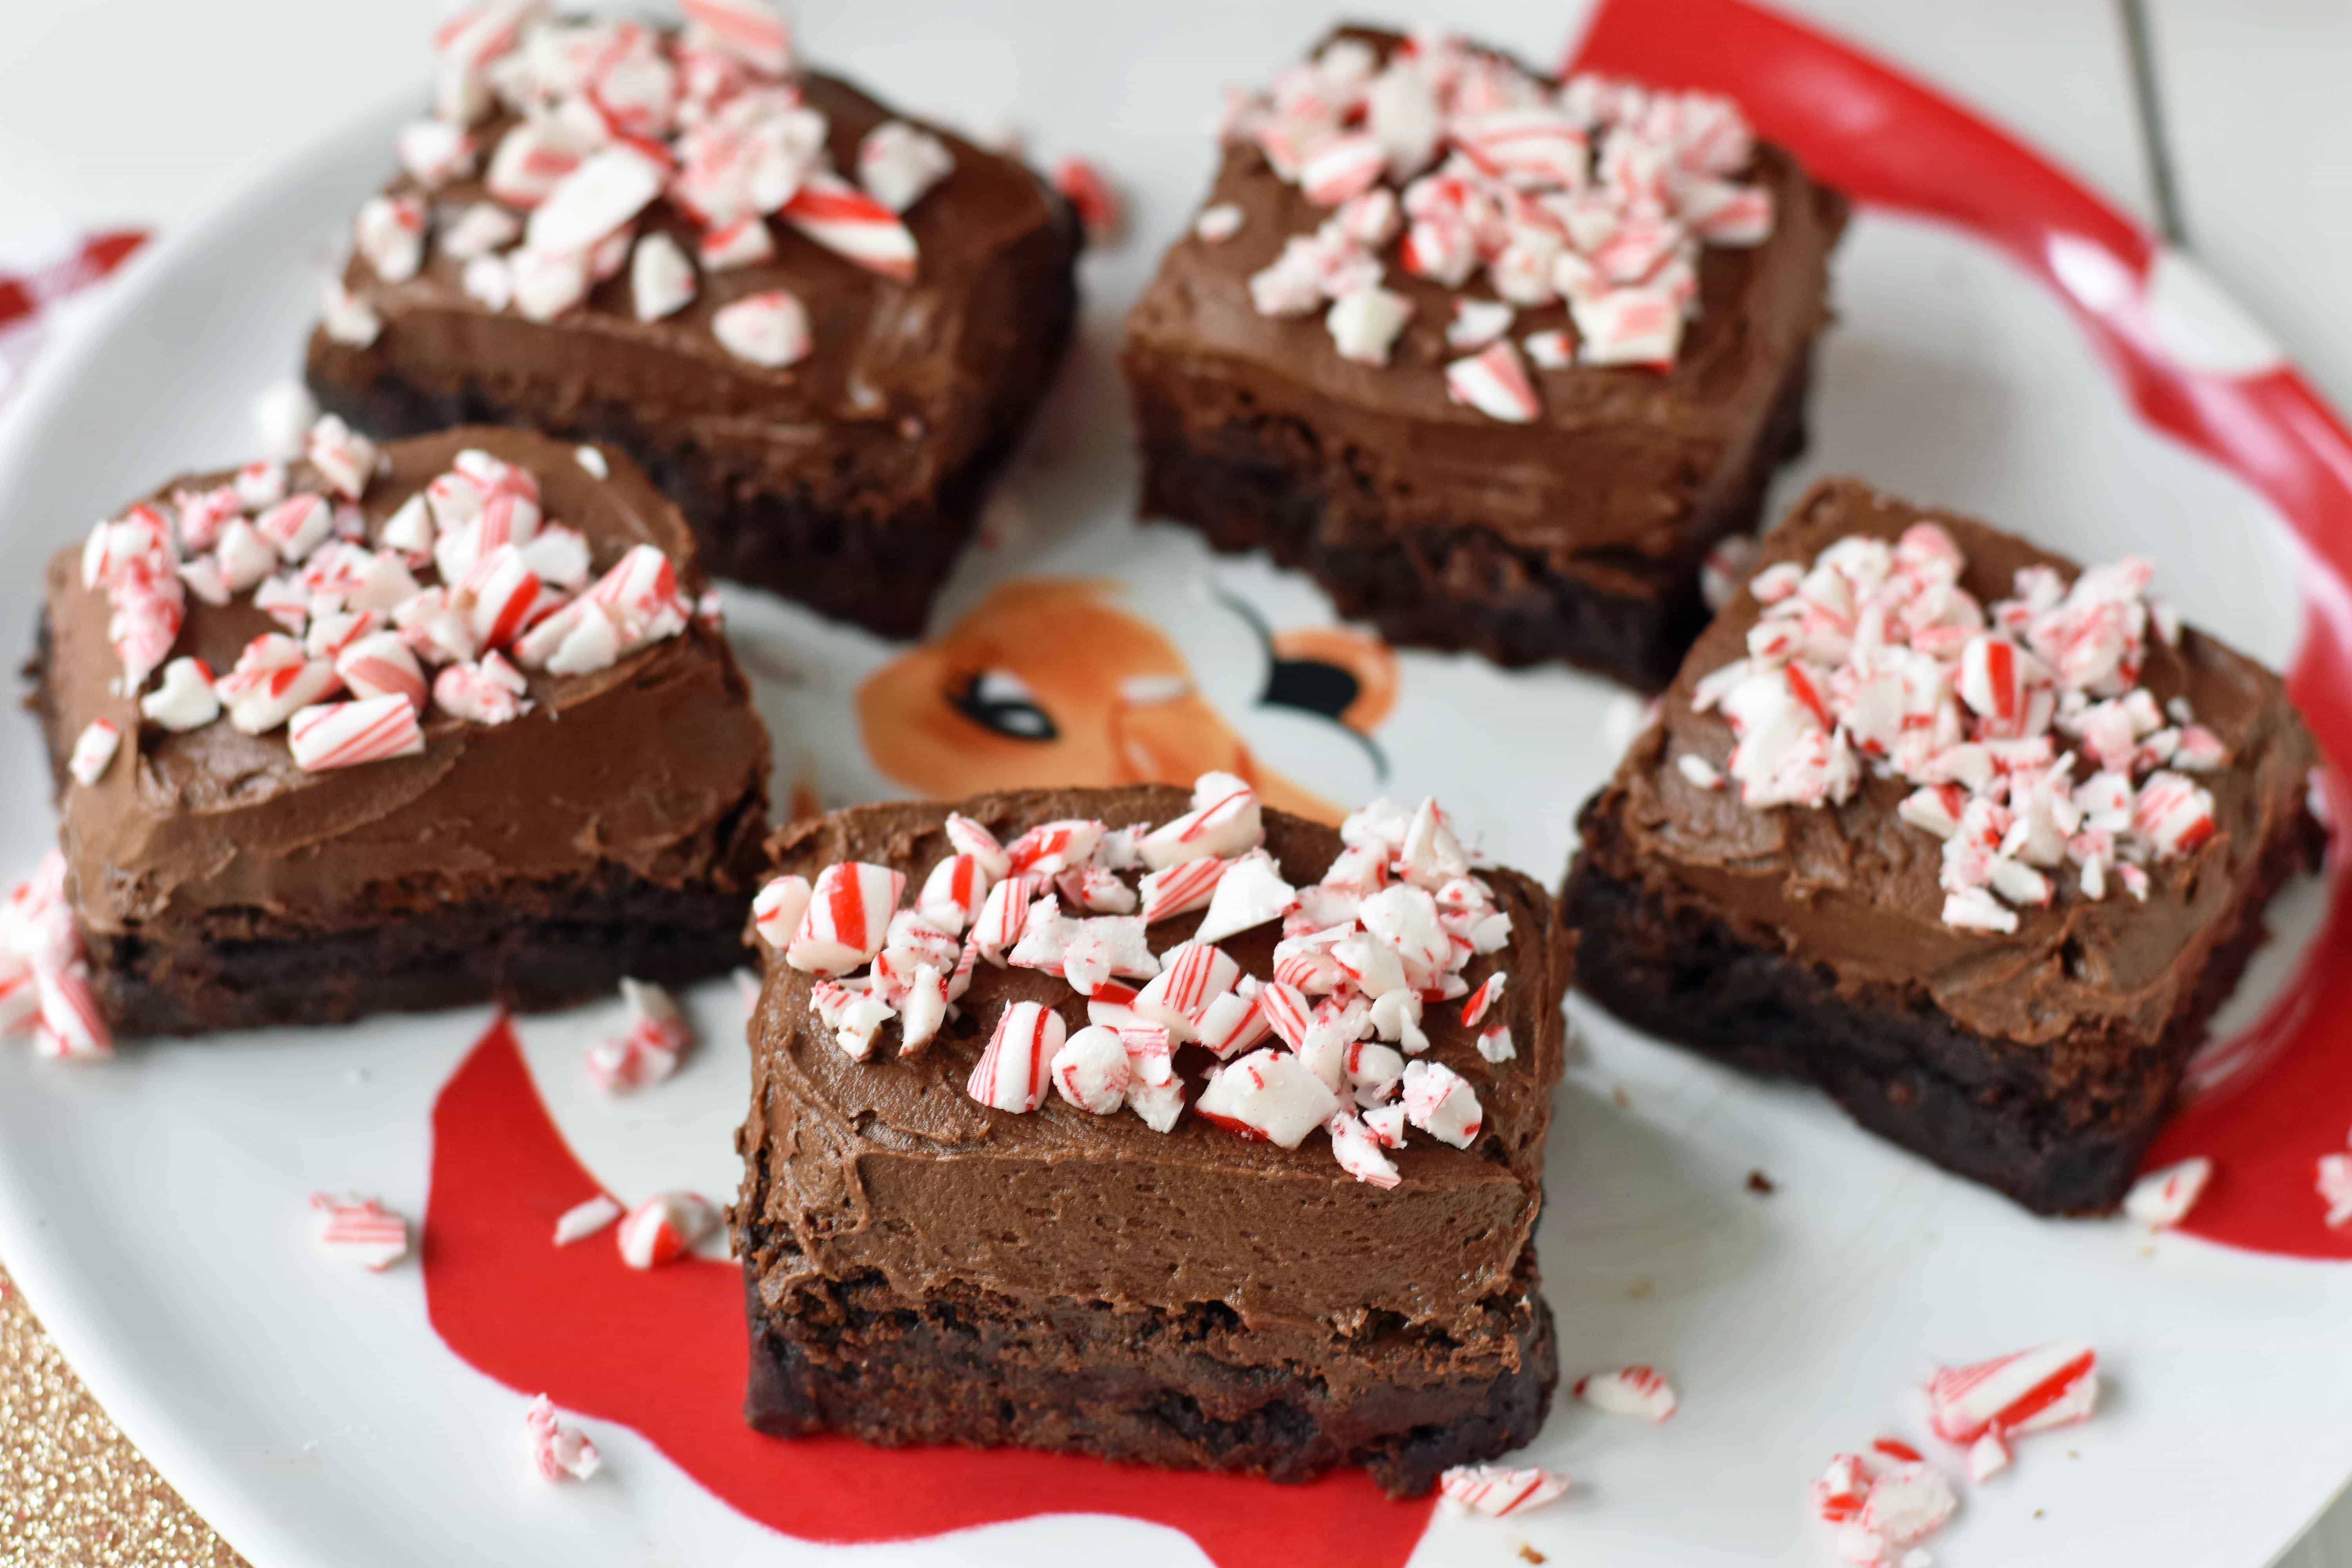 Peppermint Frosted Chocolate Brownies. Rich decadent chewy chocolate brownies topped with homemade silky smooth chocolate frosting and topped with candy canes. A chocolate frosted brownie with candy canes. www.modernhoney.com